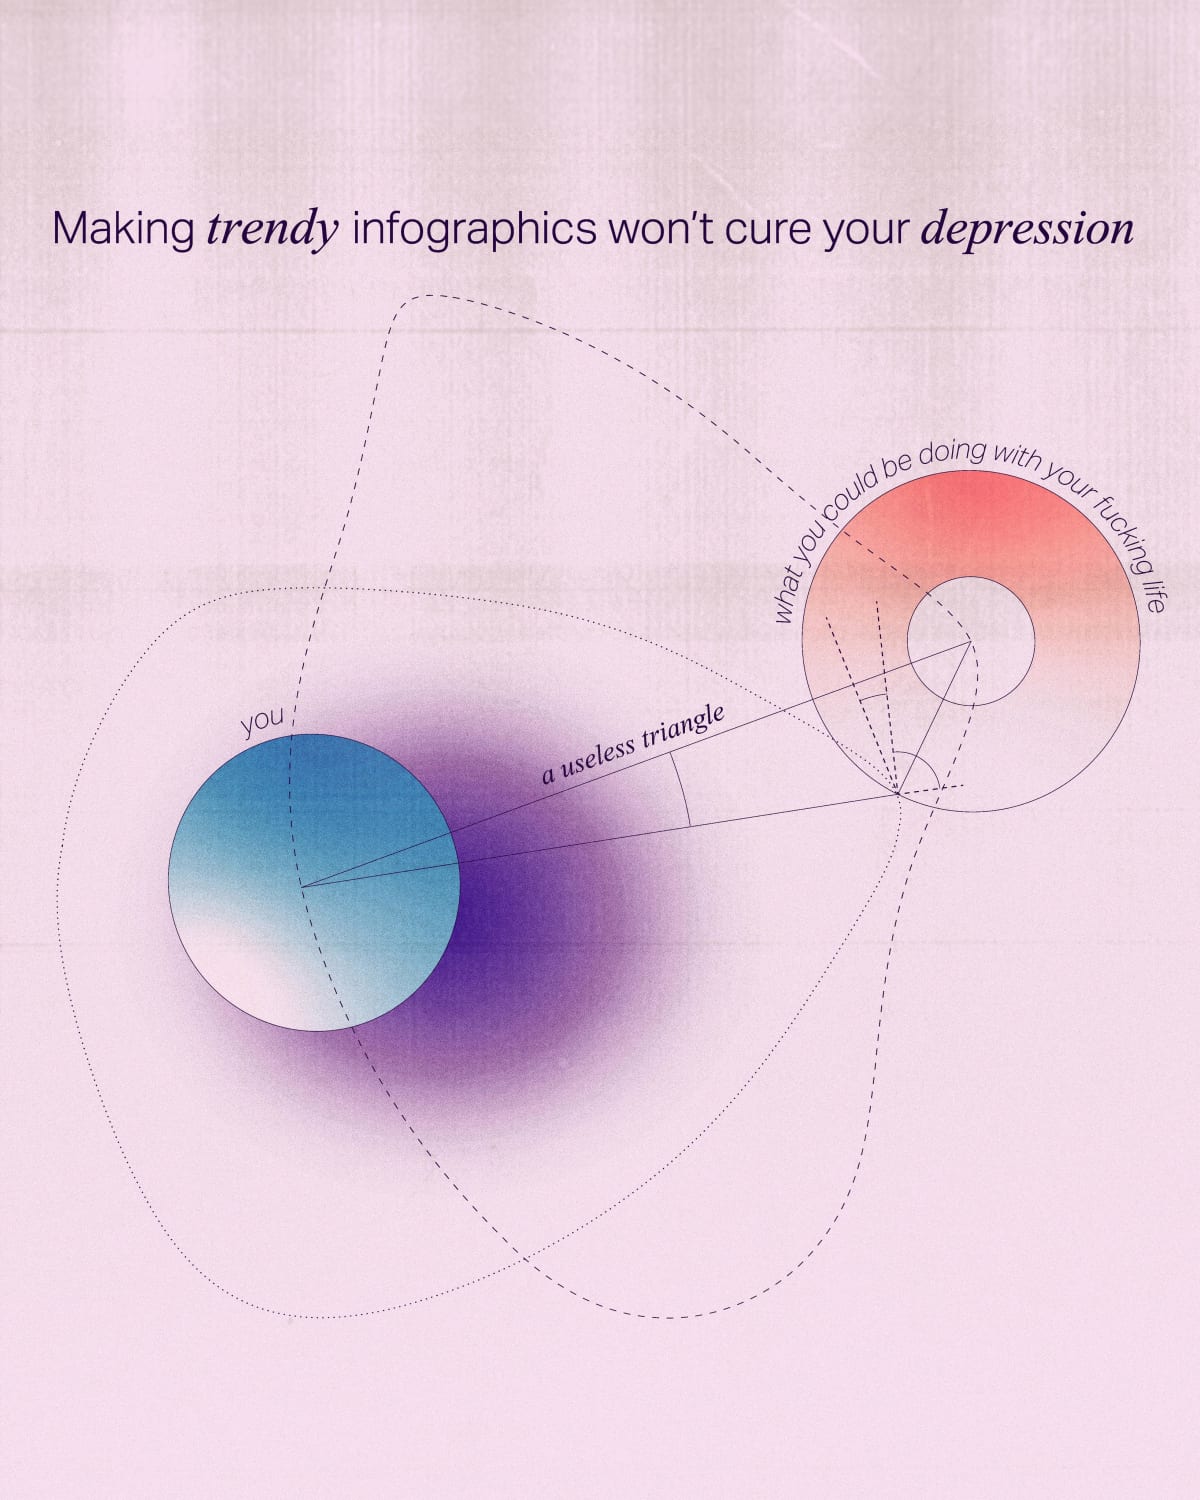 A fun simple one I did to parody those “psychological” infographics I see on Instagram